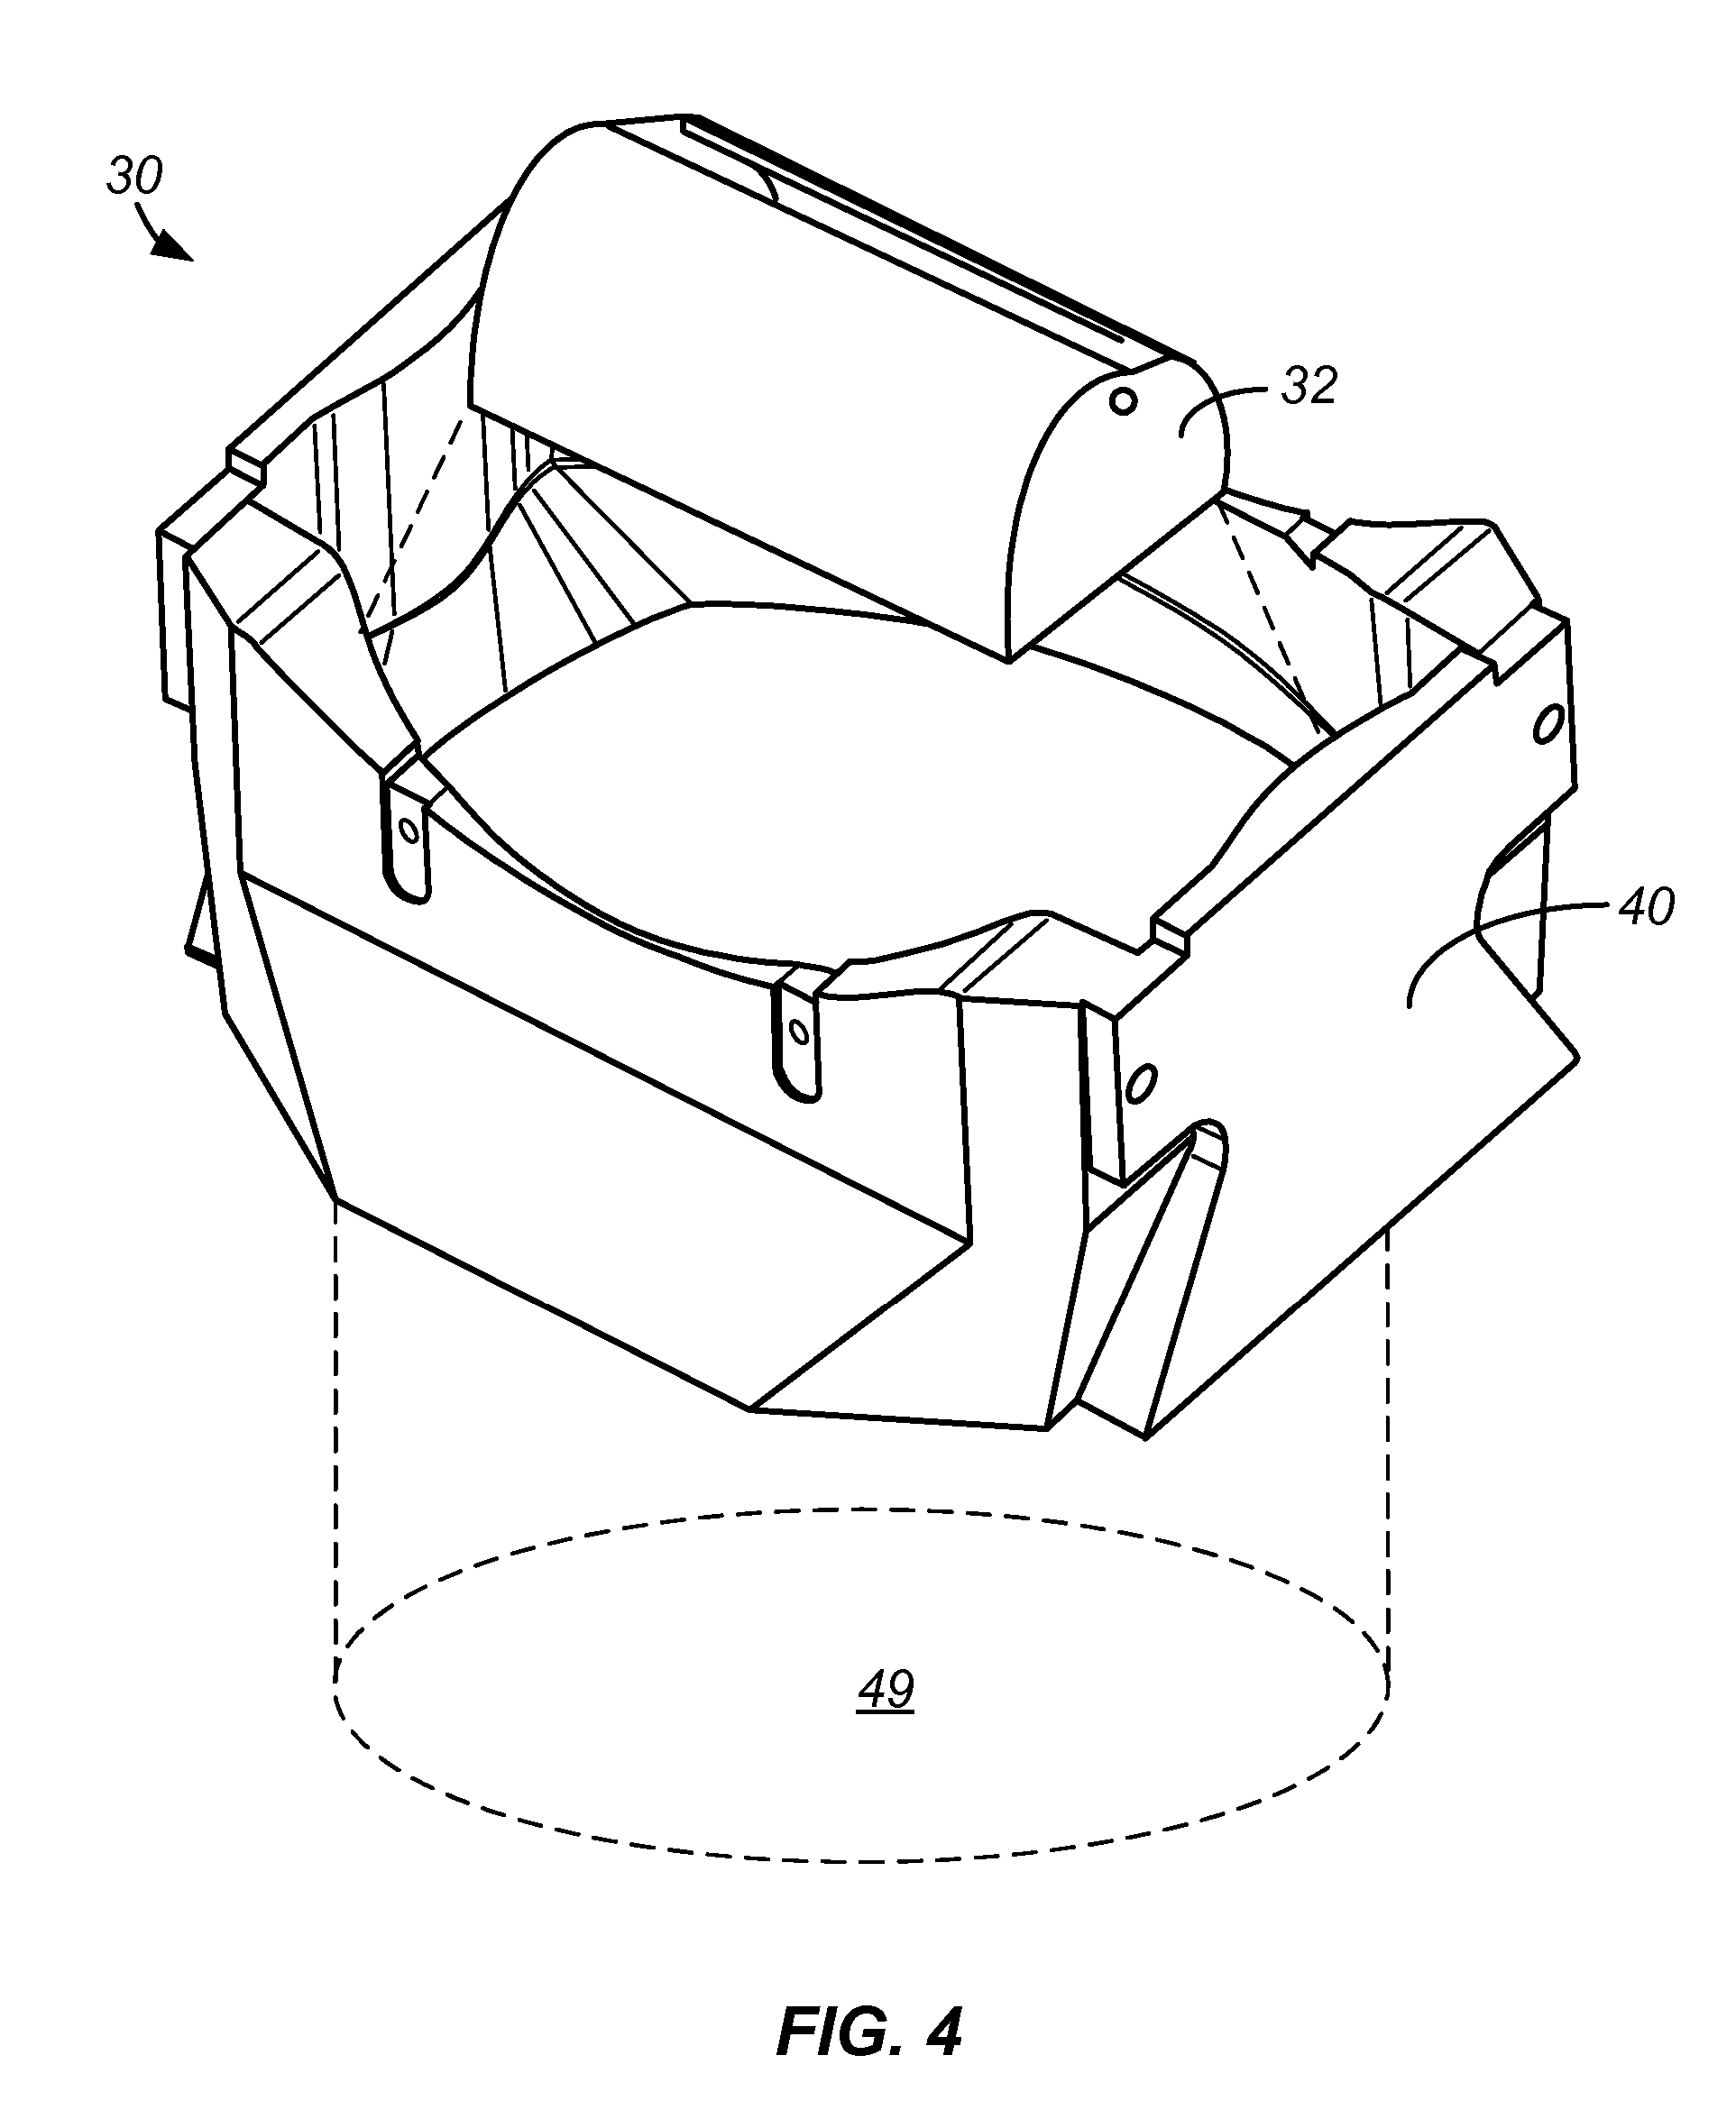 Apparatus and method for exposing a substrate to UV radiation using a reflector having both elliptical and parabolic reflective sections